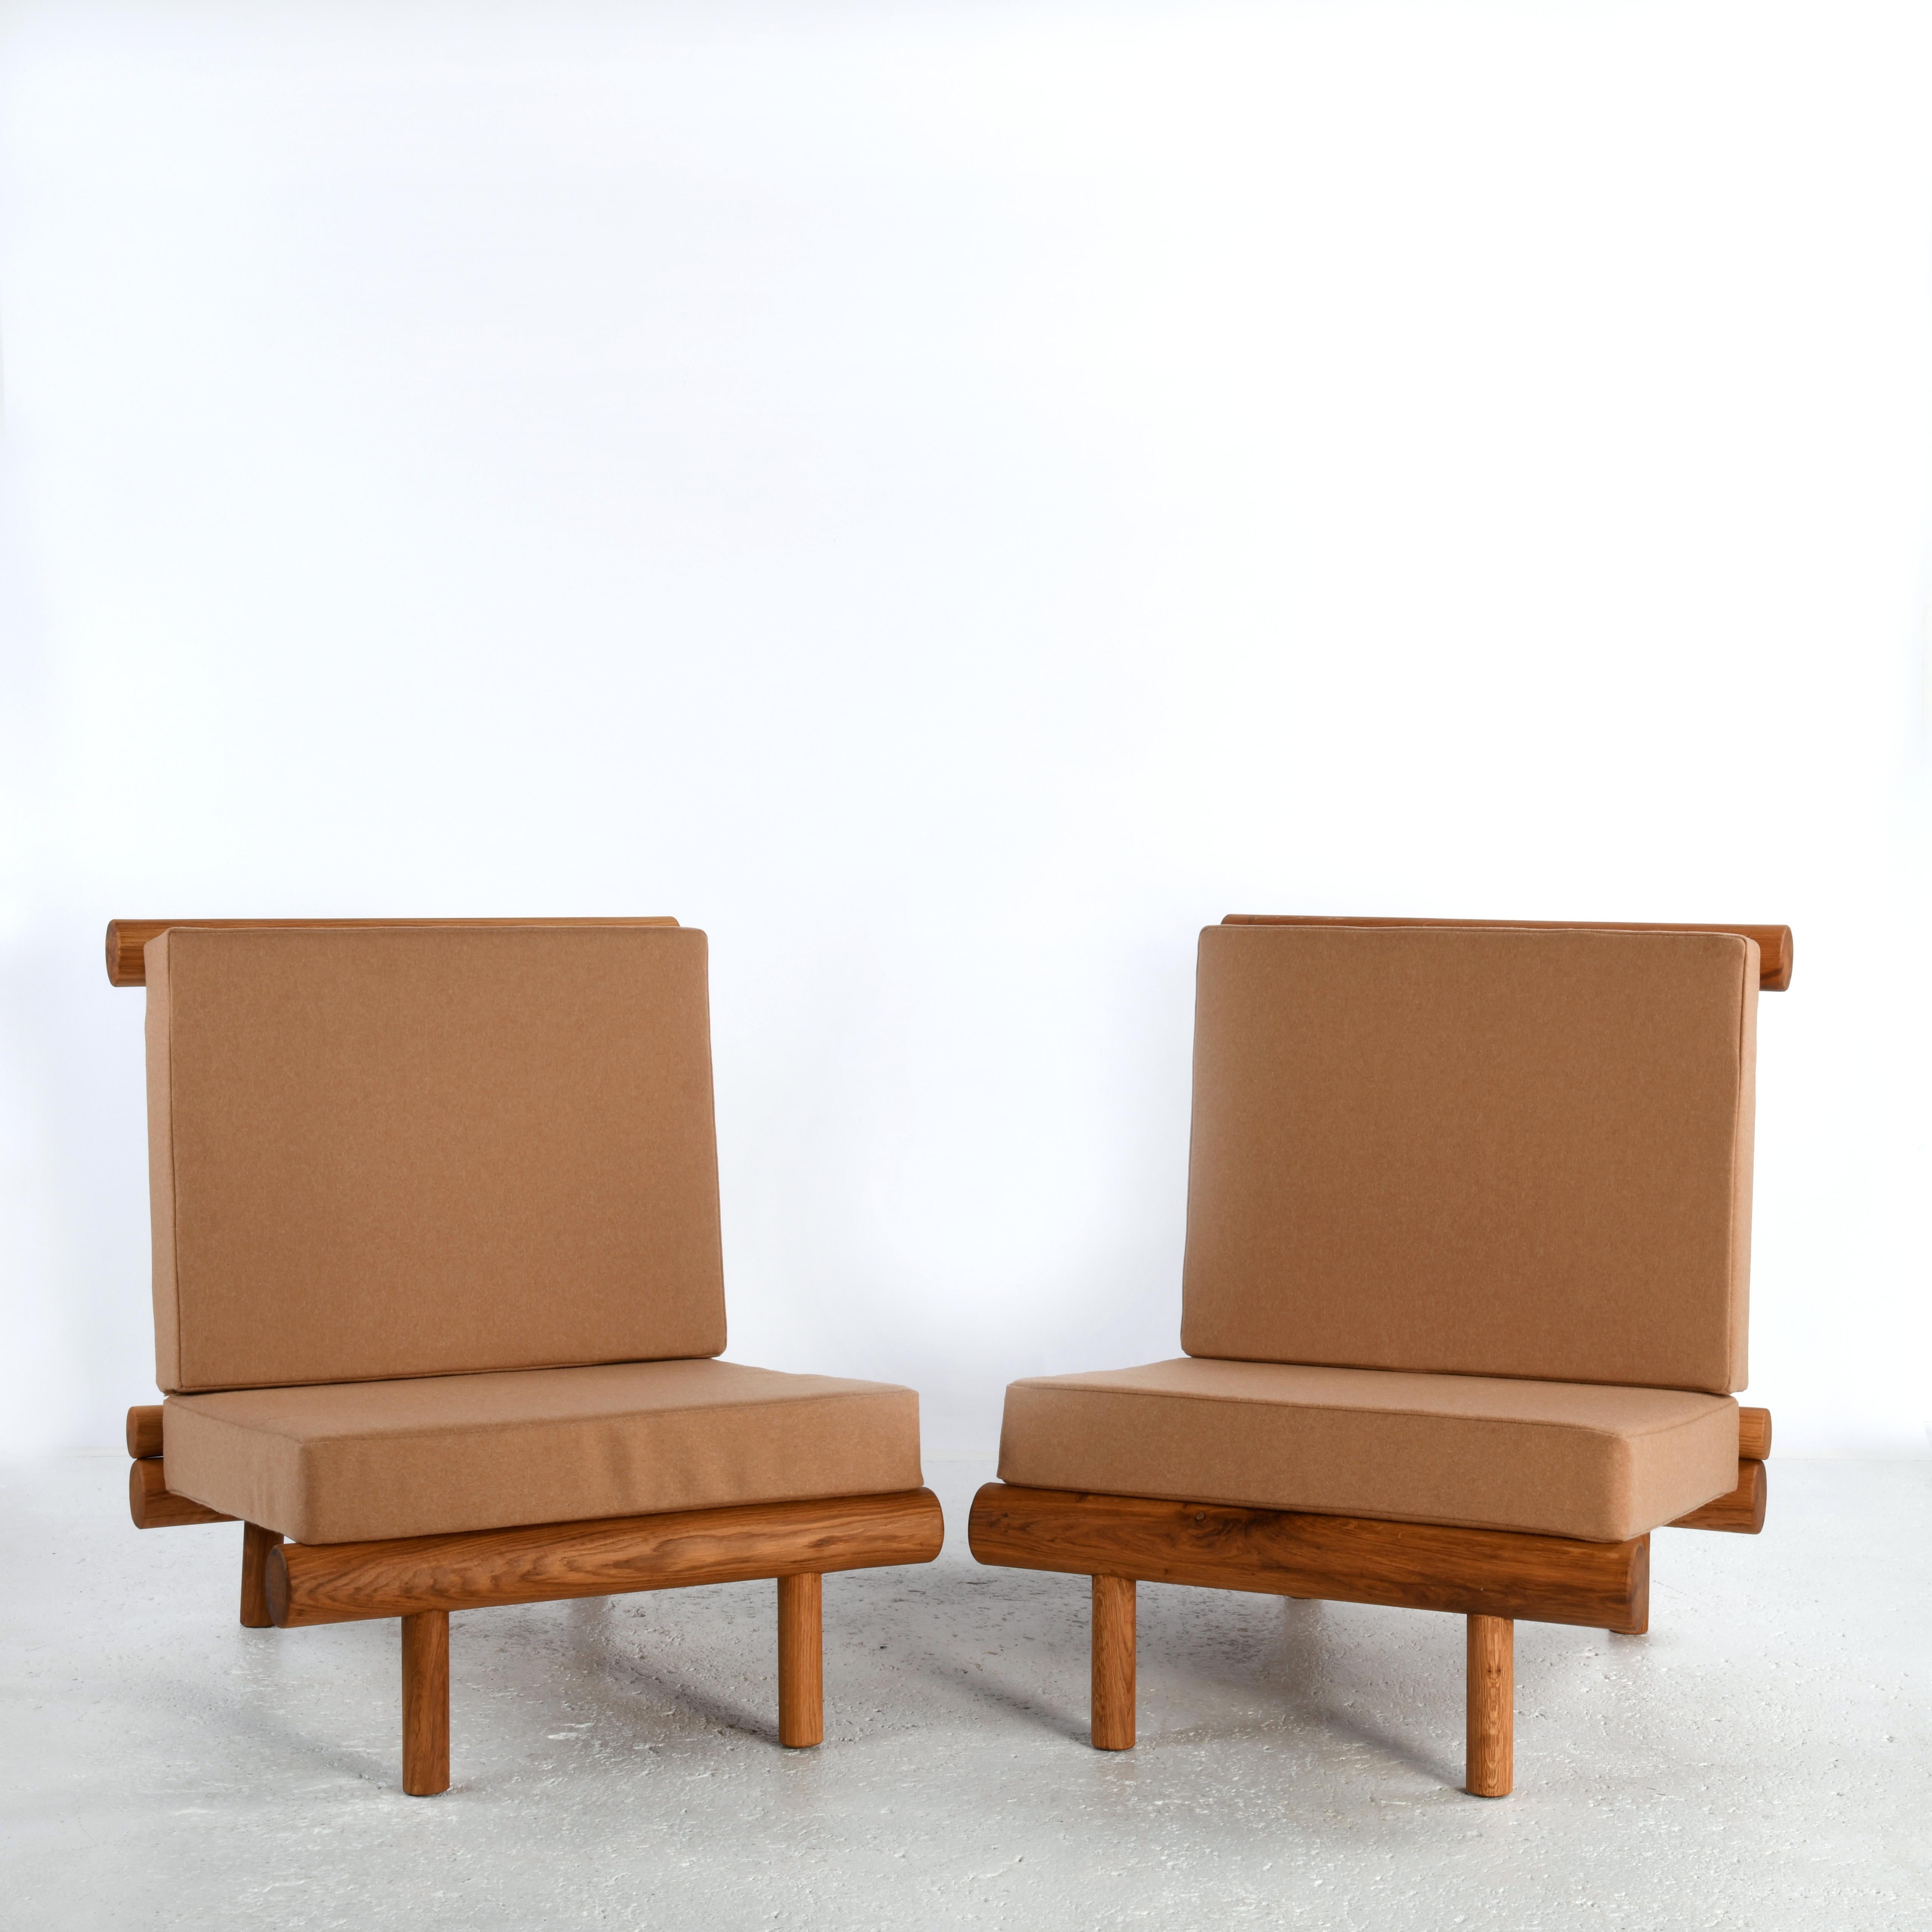 20th Century Pair of oak fireside chairs called La cachette, attributed to Charlotte Perriand